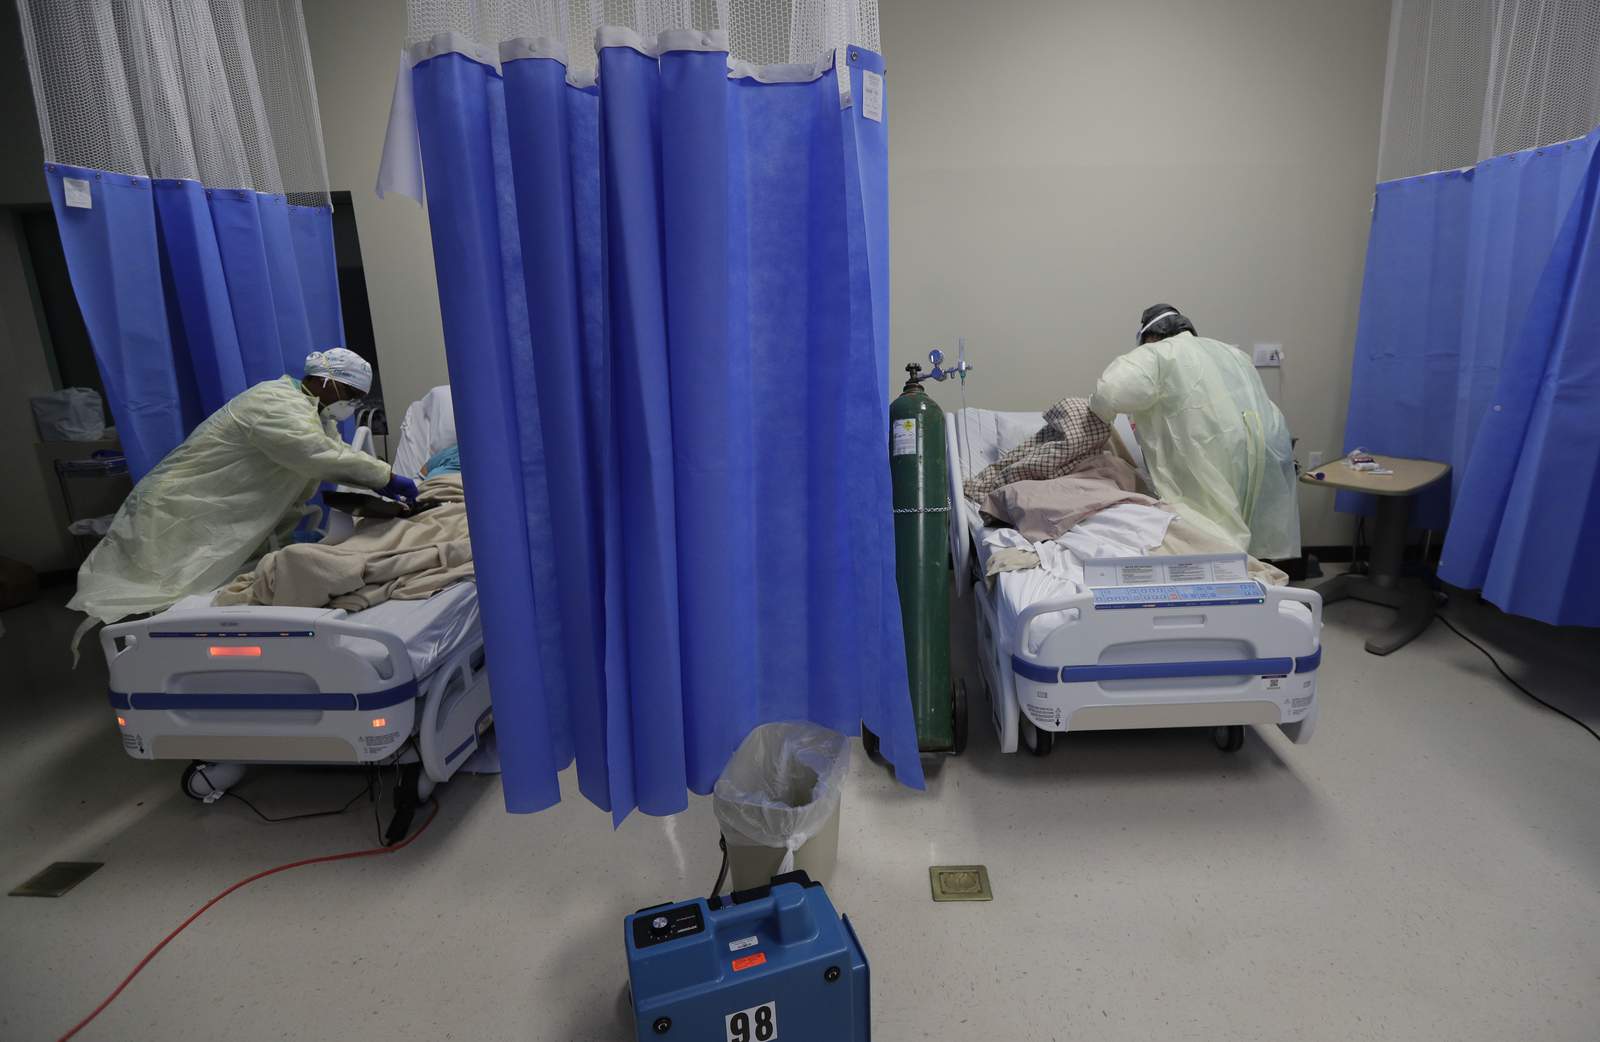 Texas hospitalizations below 7,000 for first time in weeks